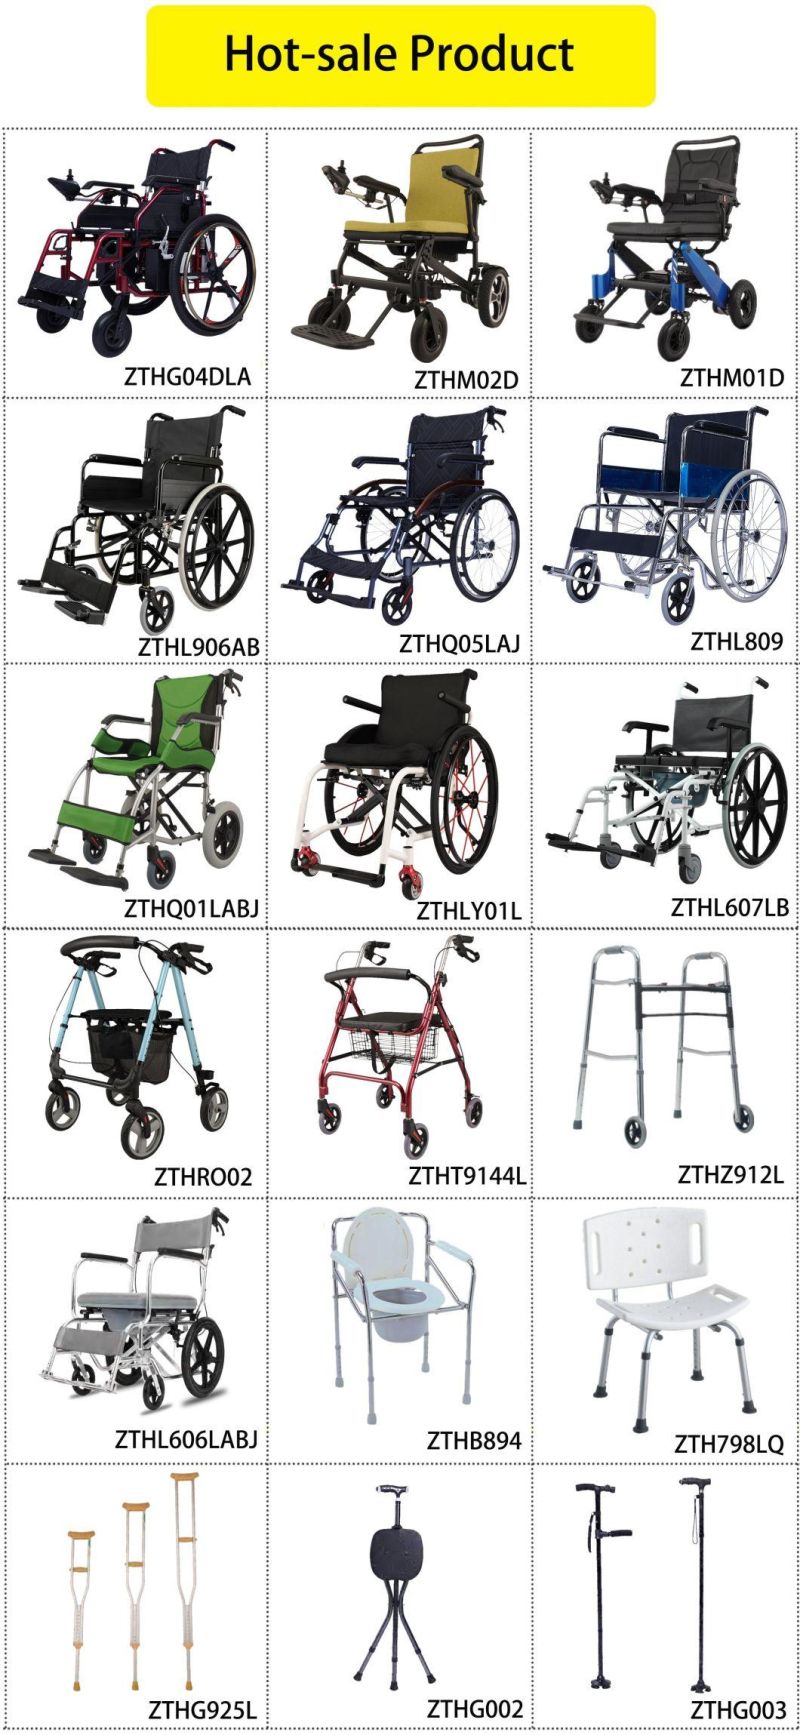 Non-Slip Hand Grip and Non-Slip Foot Pad Steel Elder or Disabled People Outdoor Folding Walker Frame 2 Wheels Safety Light Weight Walking Assistance